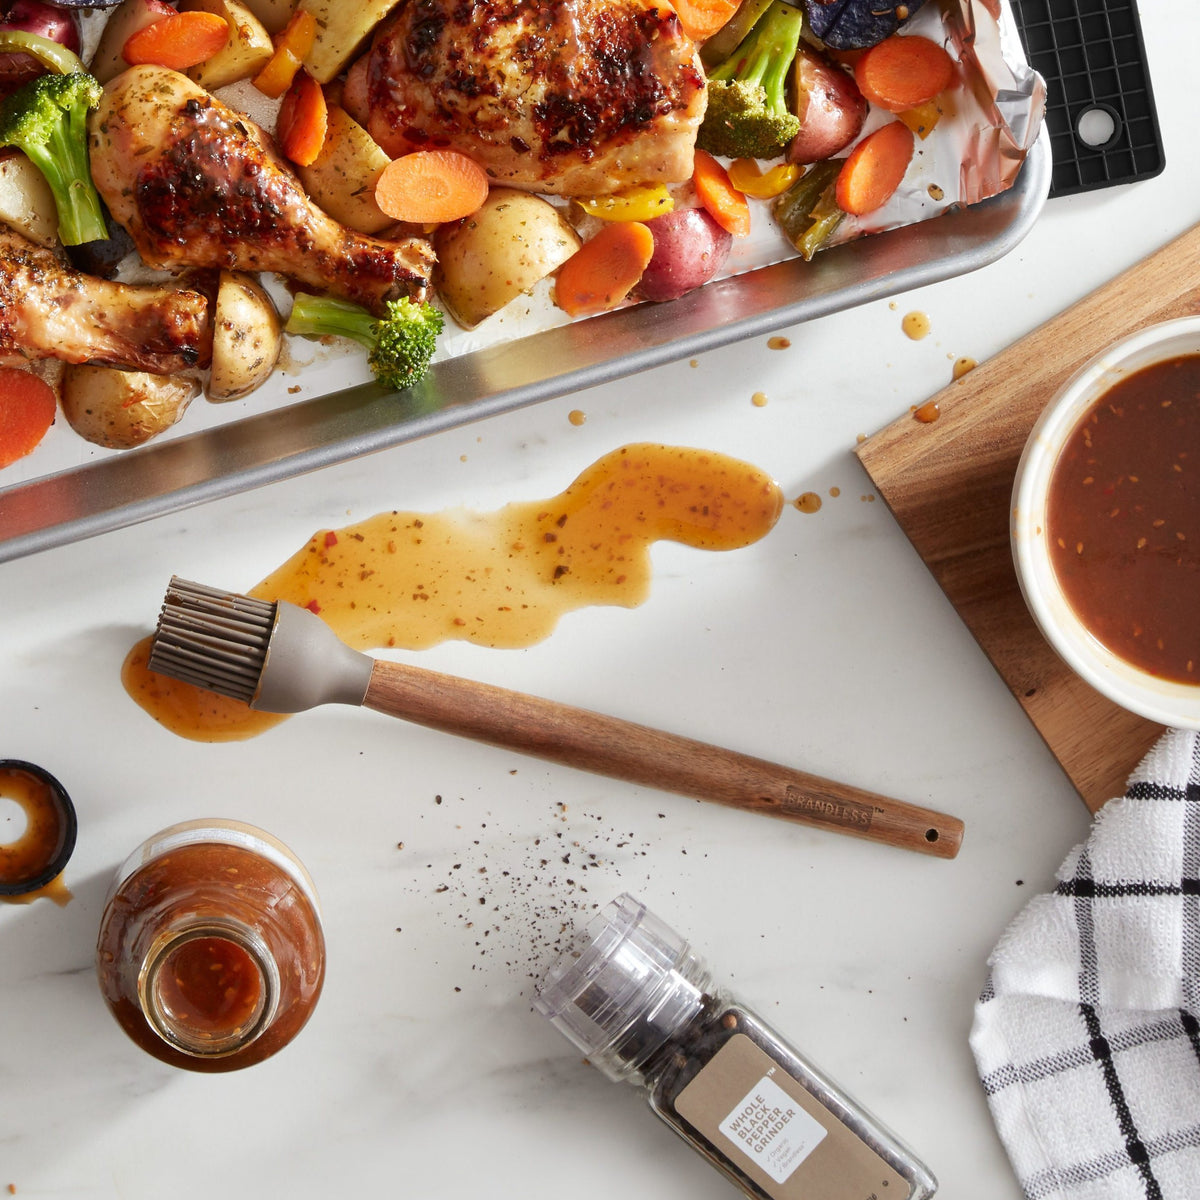 Lifestyle photo, silicone basting brush on a kitchen counter having just spread a sweet chili marinade over a baking tray of chicken separates and chopped veggies.